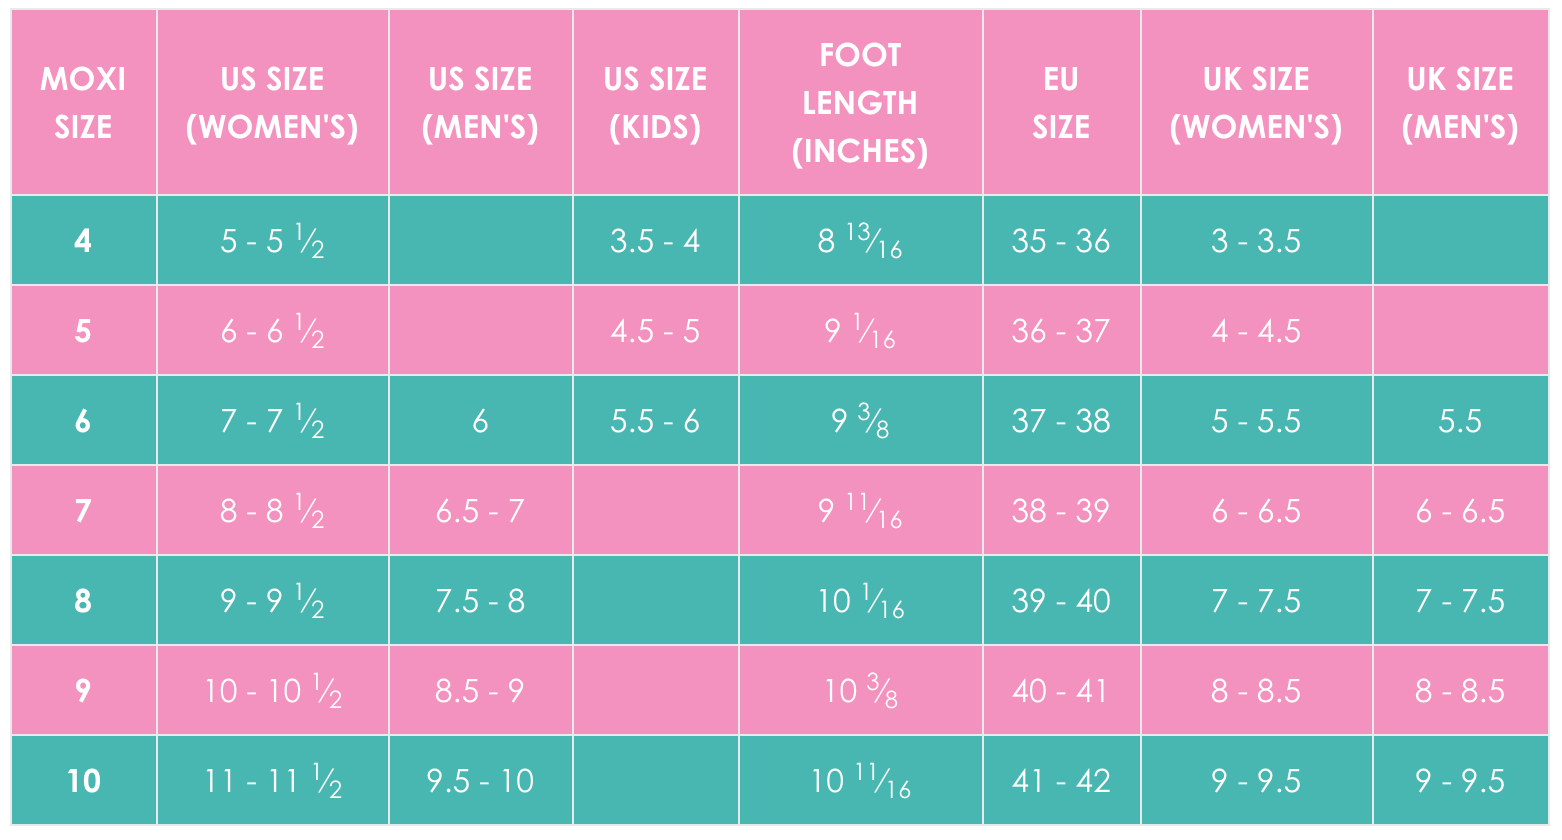 Sizing – Fritzy's Roller Skate Shop